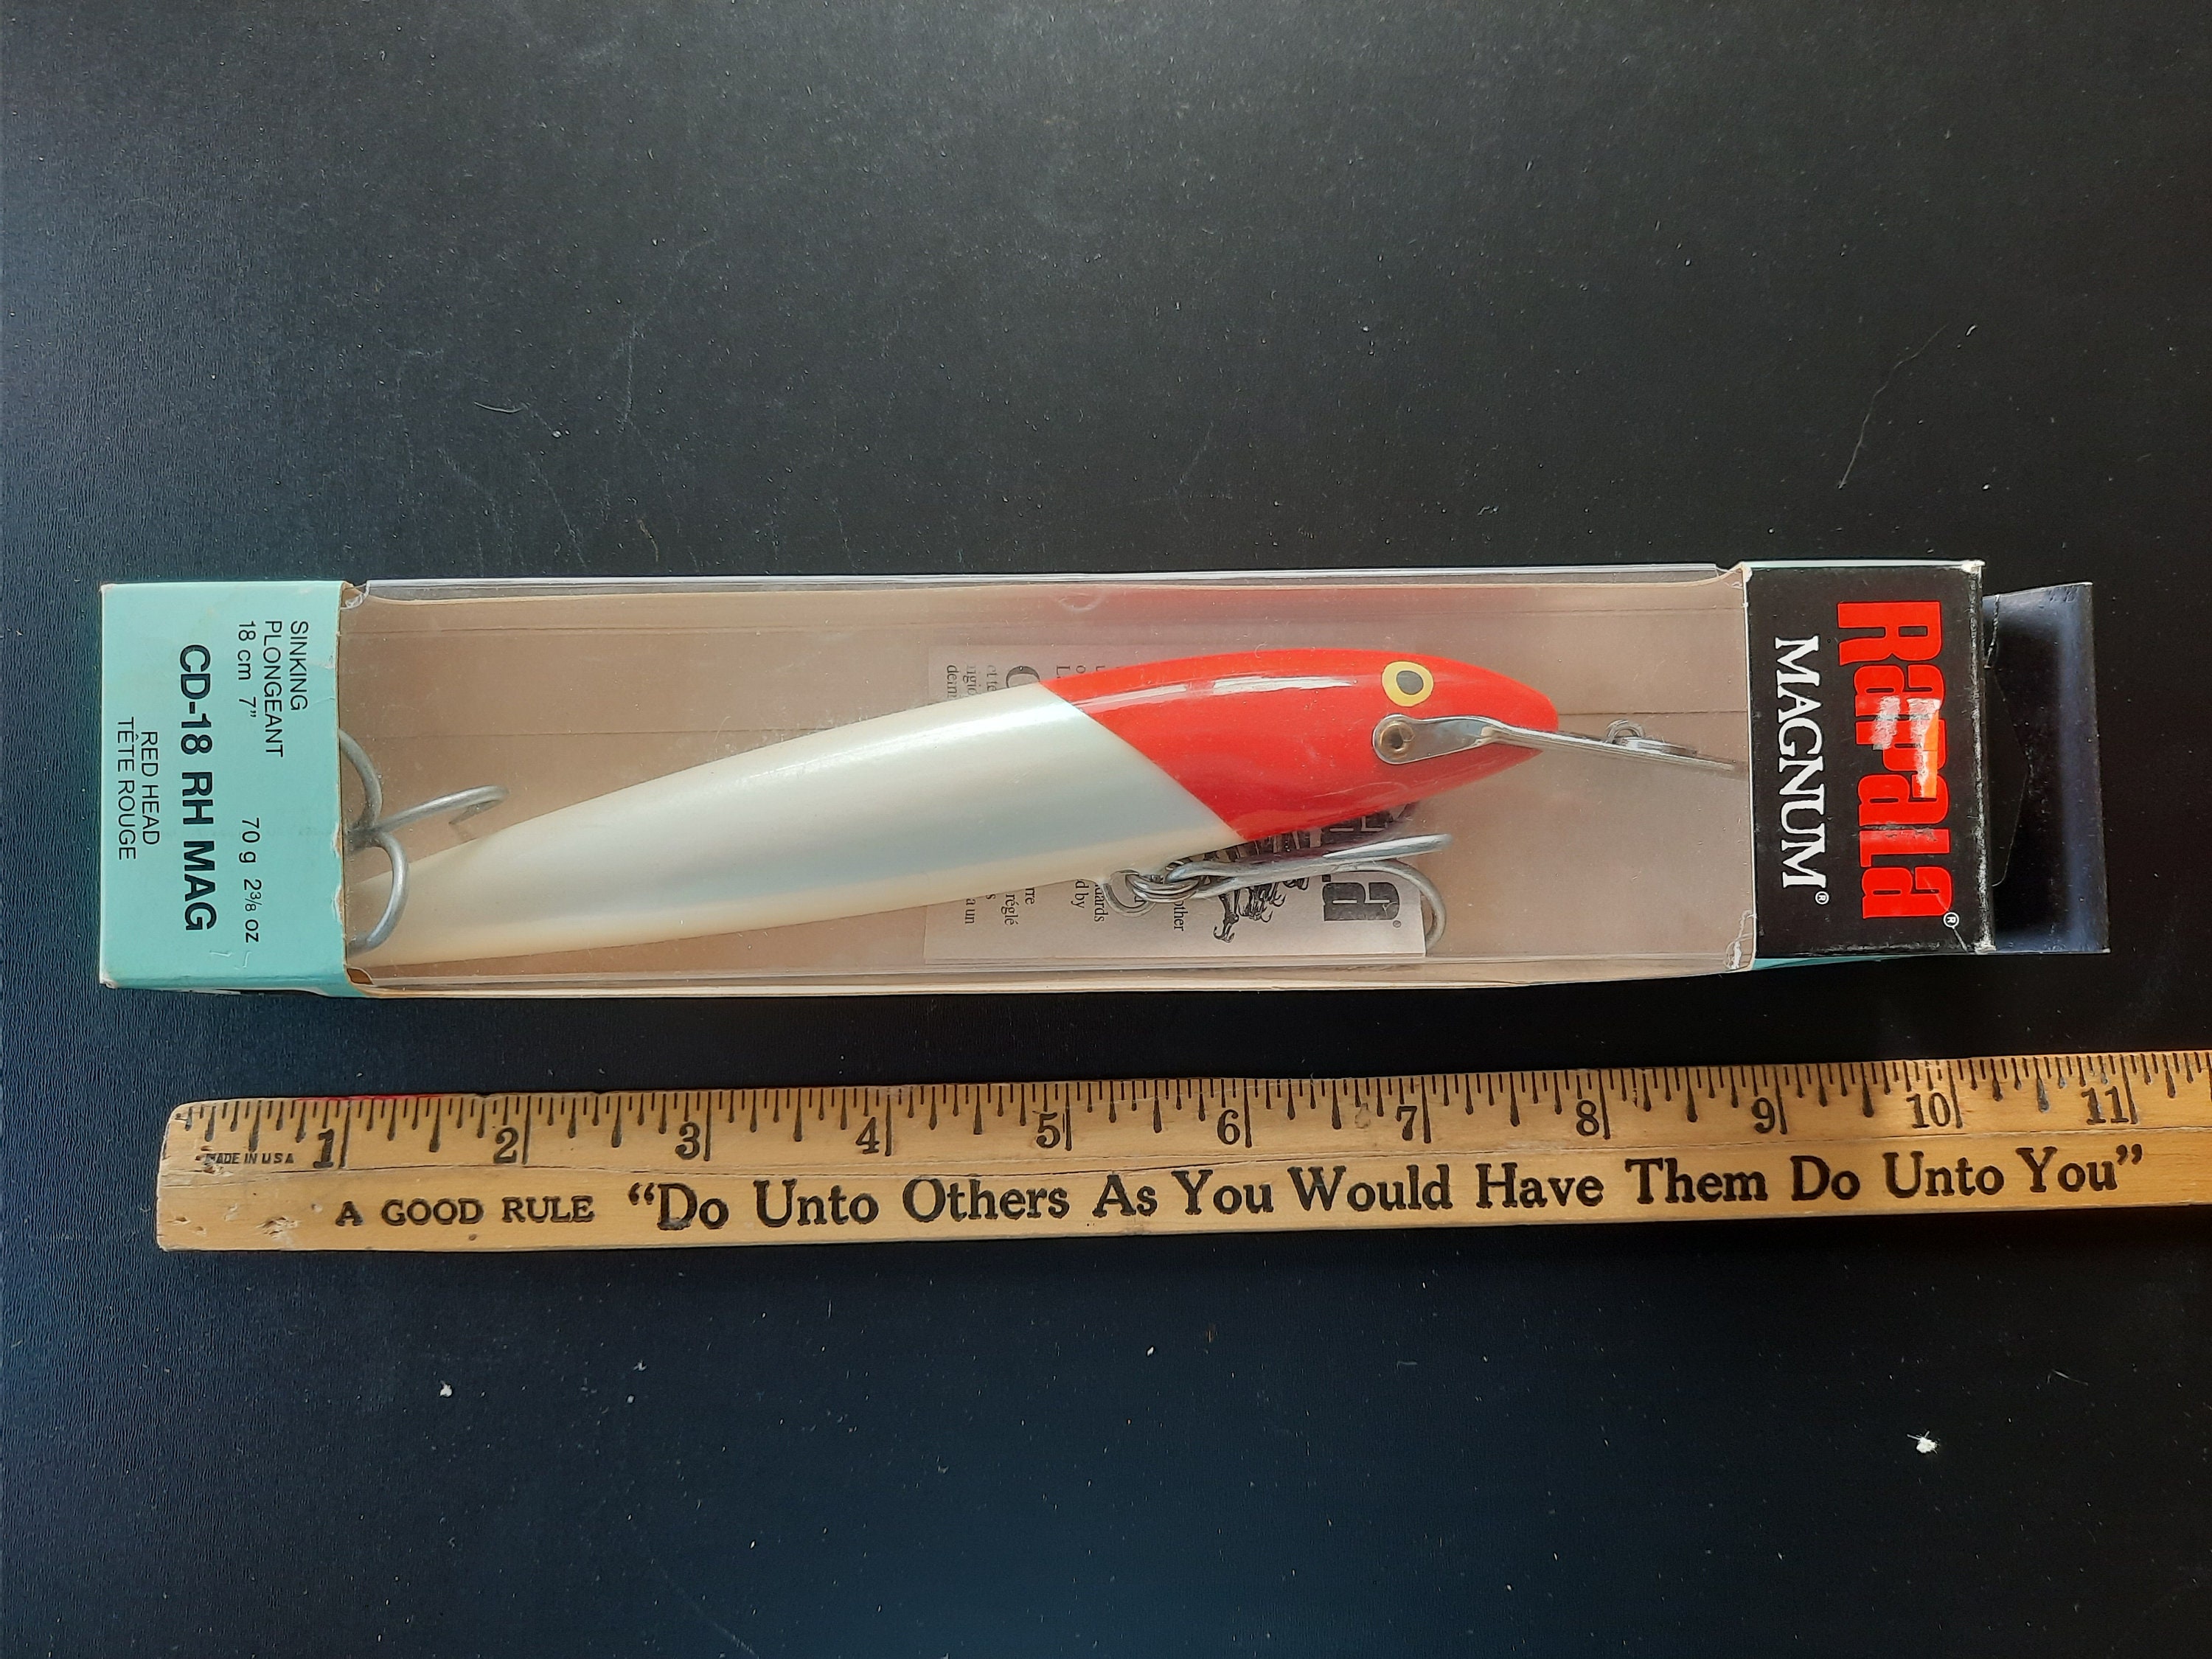 Vintage 1990s Wooden Big Game Lure: Rapala Magnum CD-18 RH MAG, Red/white  Sinking 7, 2 3/8 Oz. Unused in Original Package Rare Find -  Finland